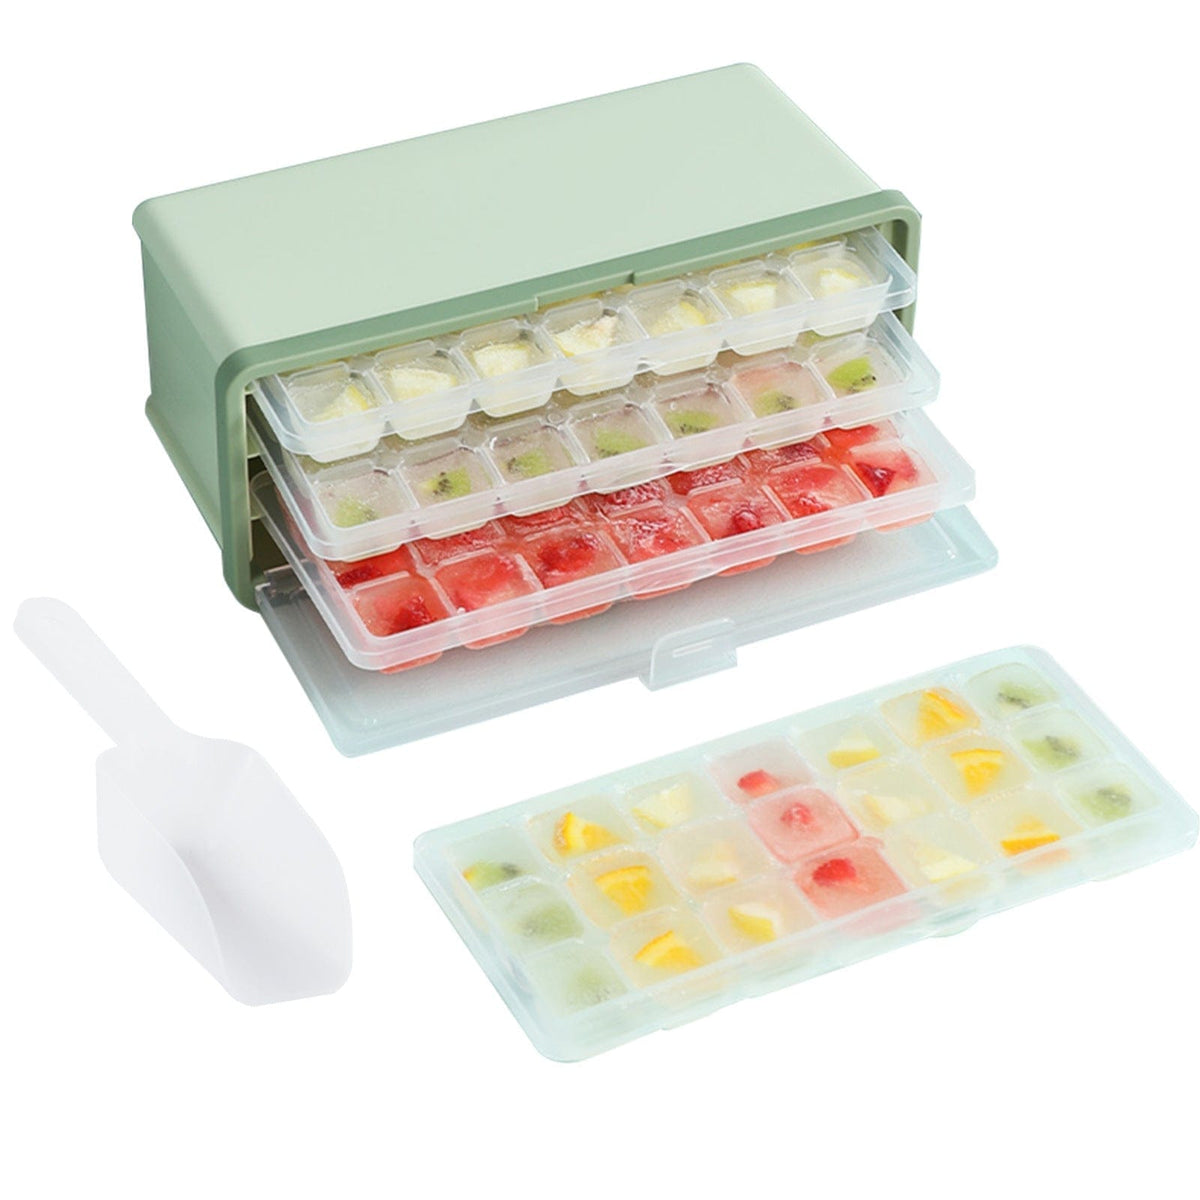 Drawer Type Plastic Ice Cube Mold Maker With Lid And Bin For Beer Cooling Ice Cube Tray Bennys Beauty World